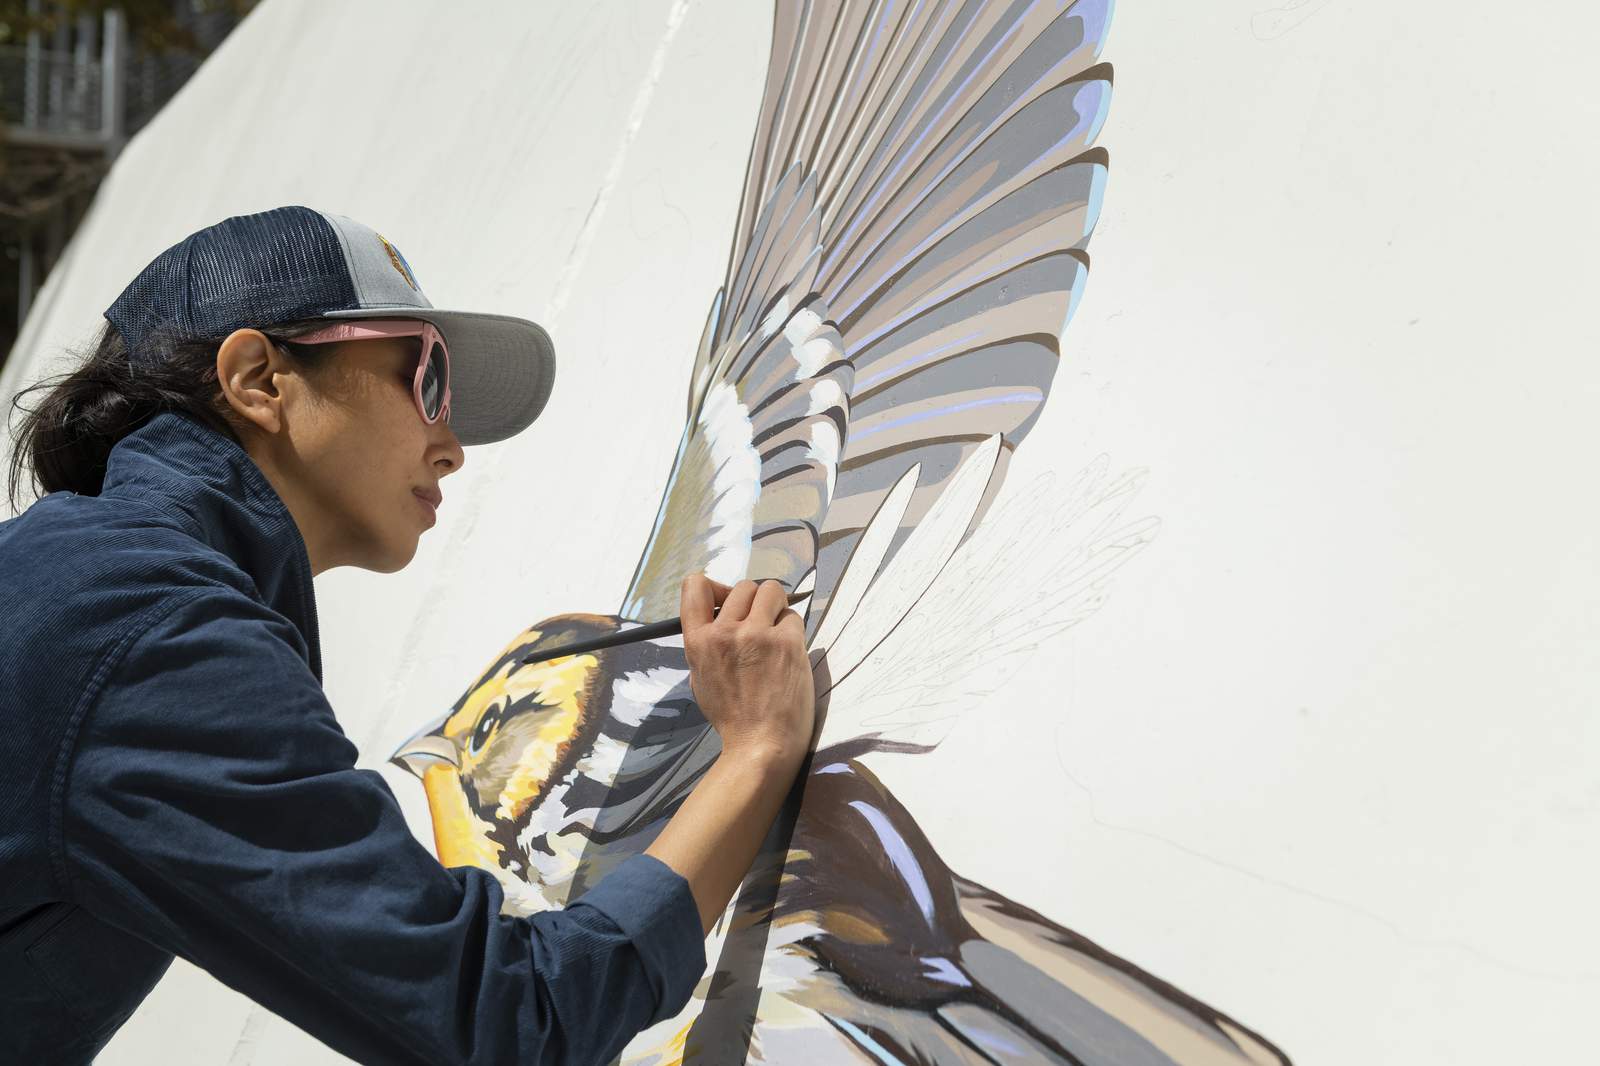 White Oak, Buffalo Bayou to become new home of new art mural dedicated to migratory birds